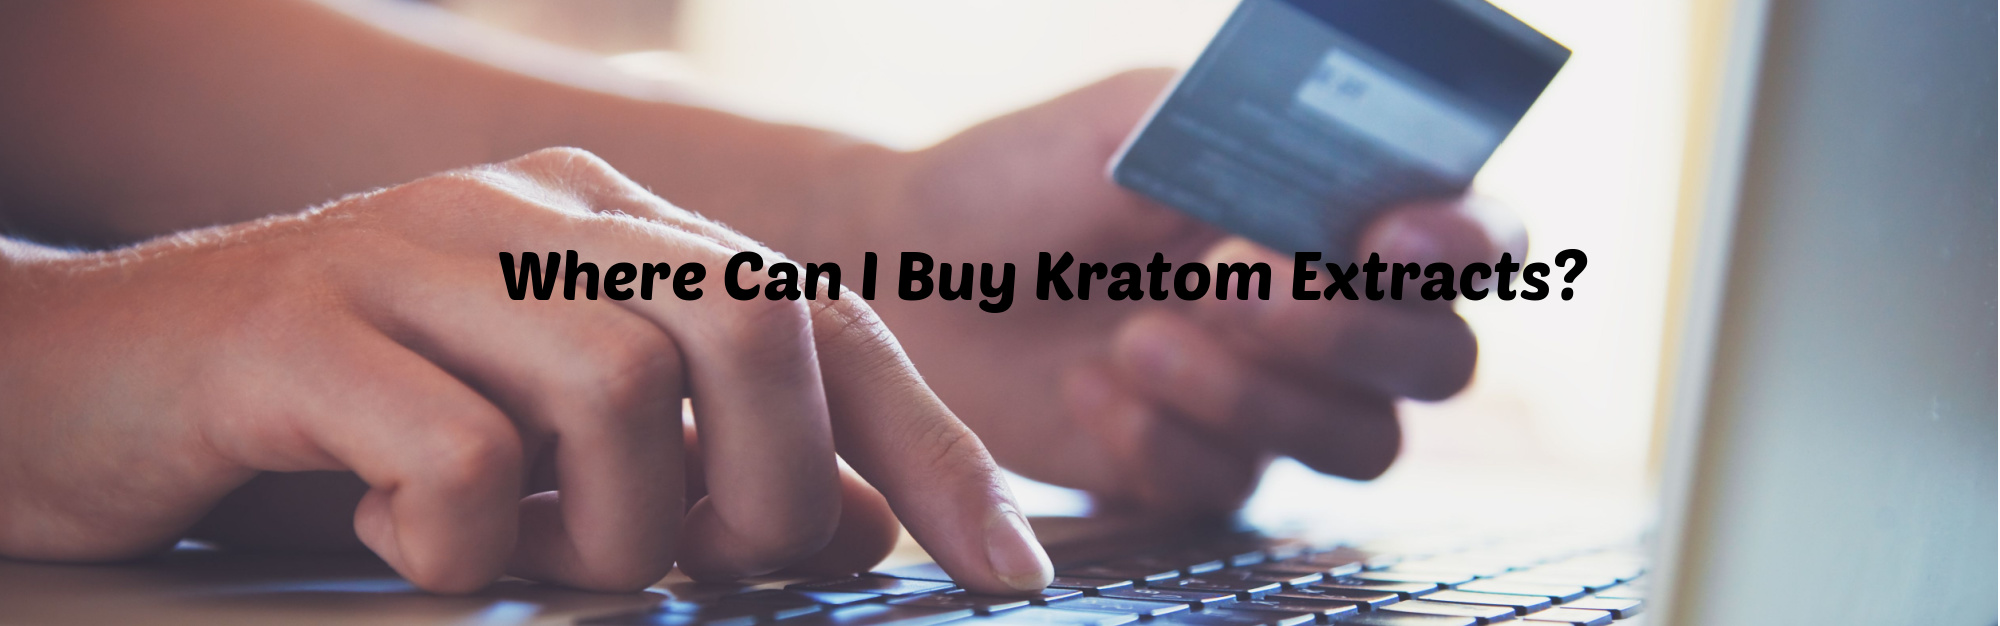 image of where can I buy kratom extracts